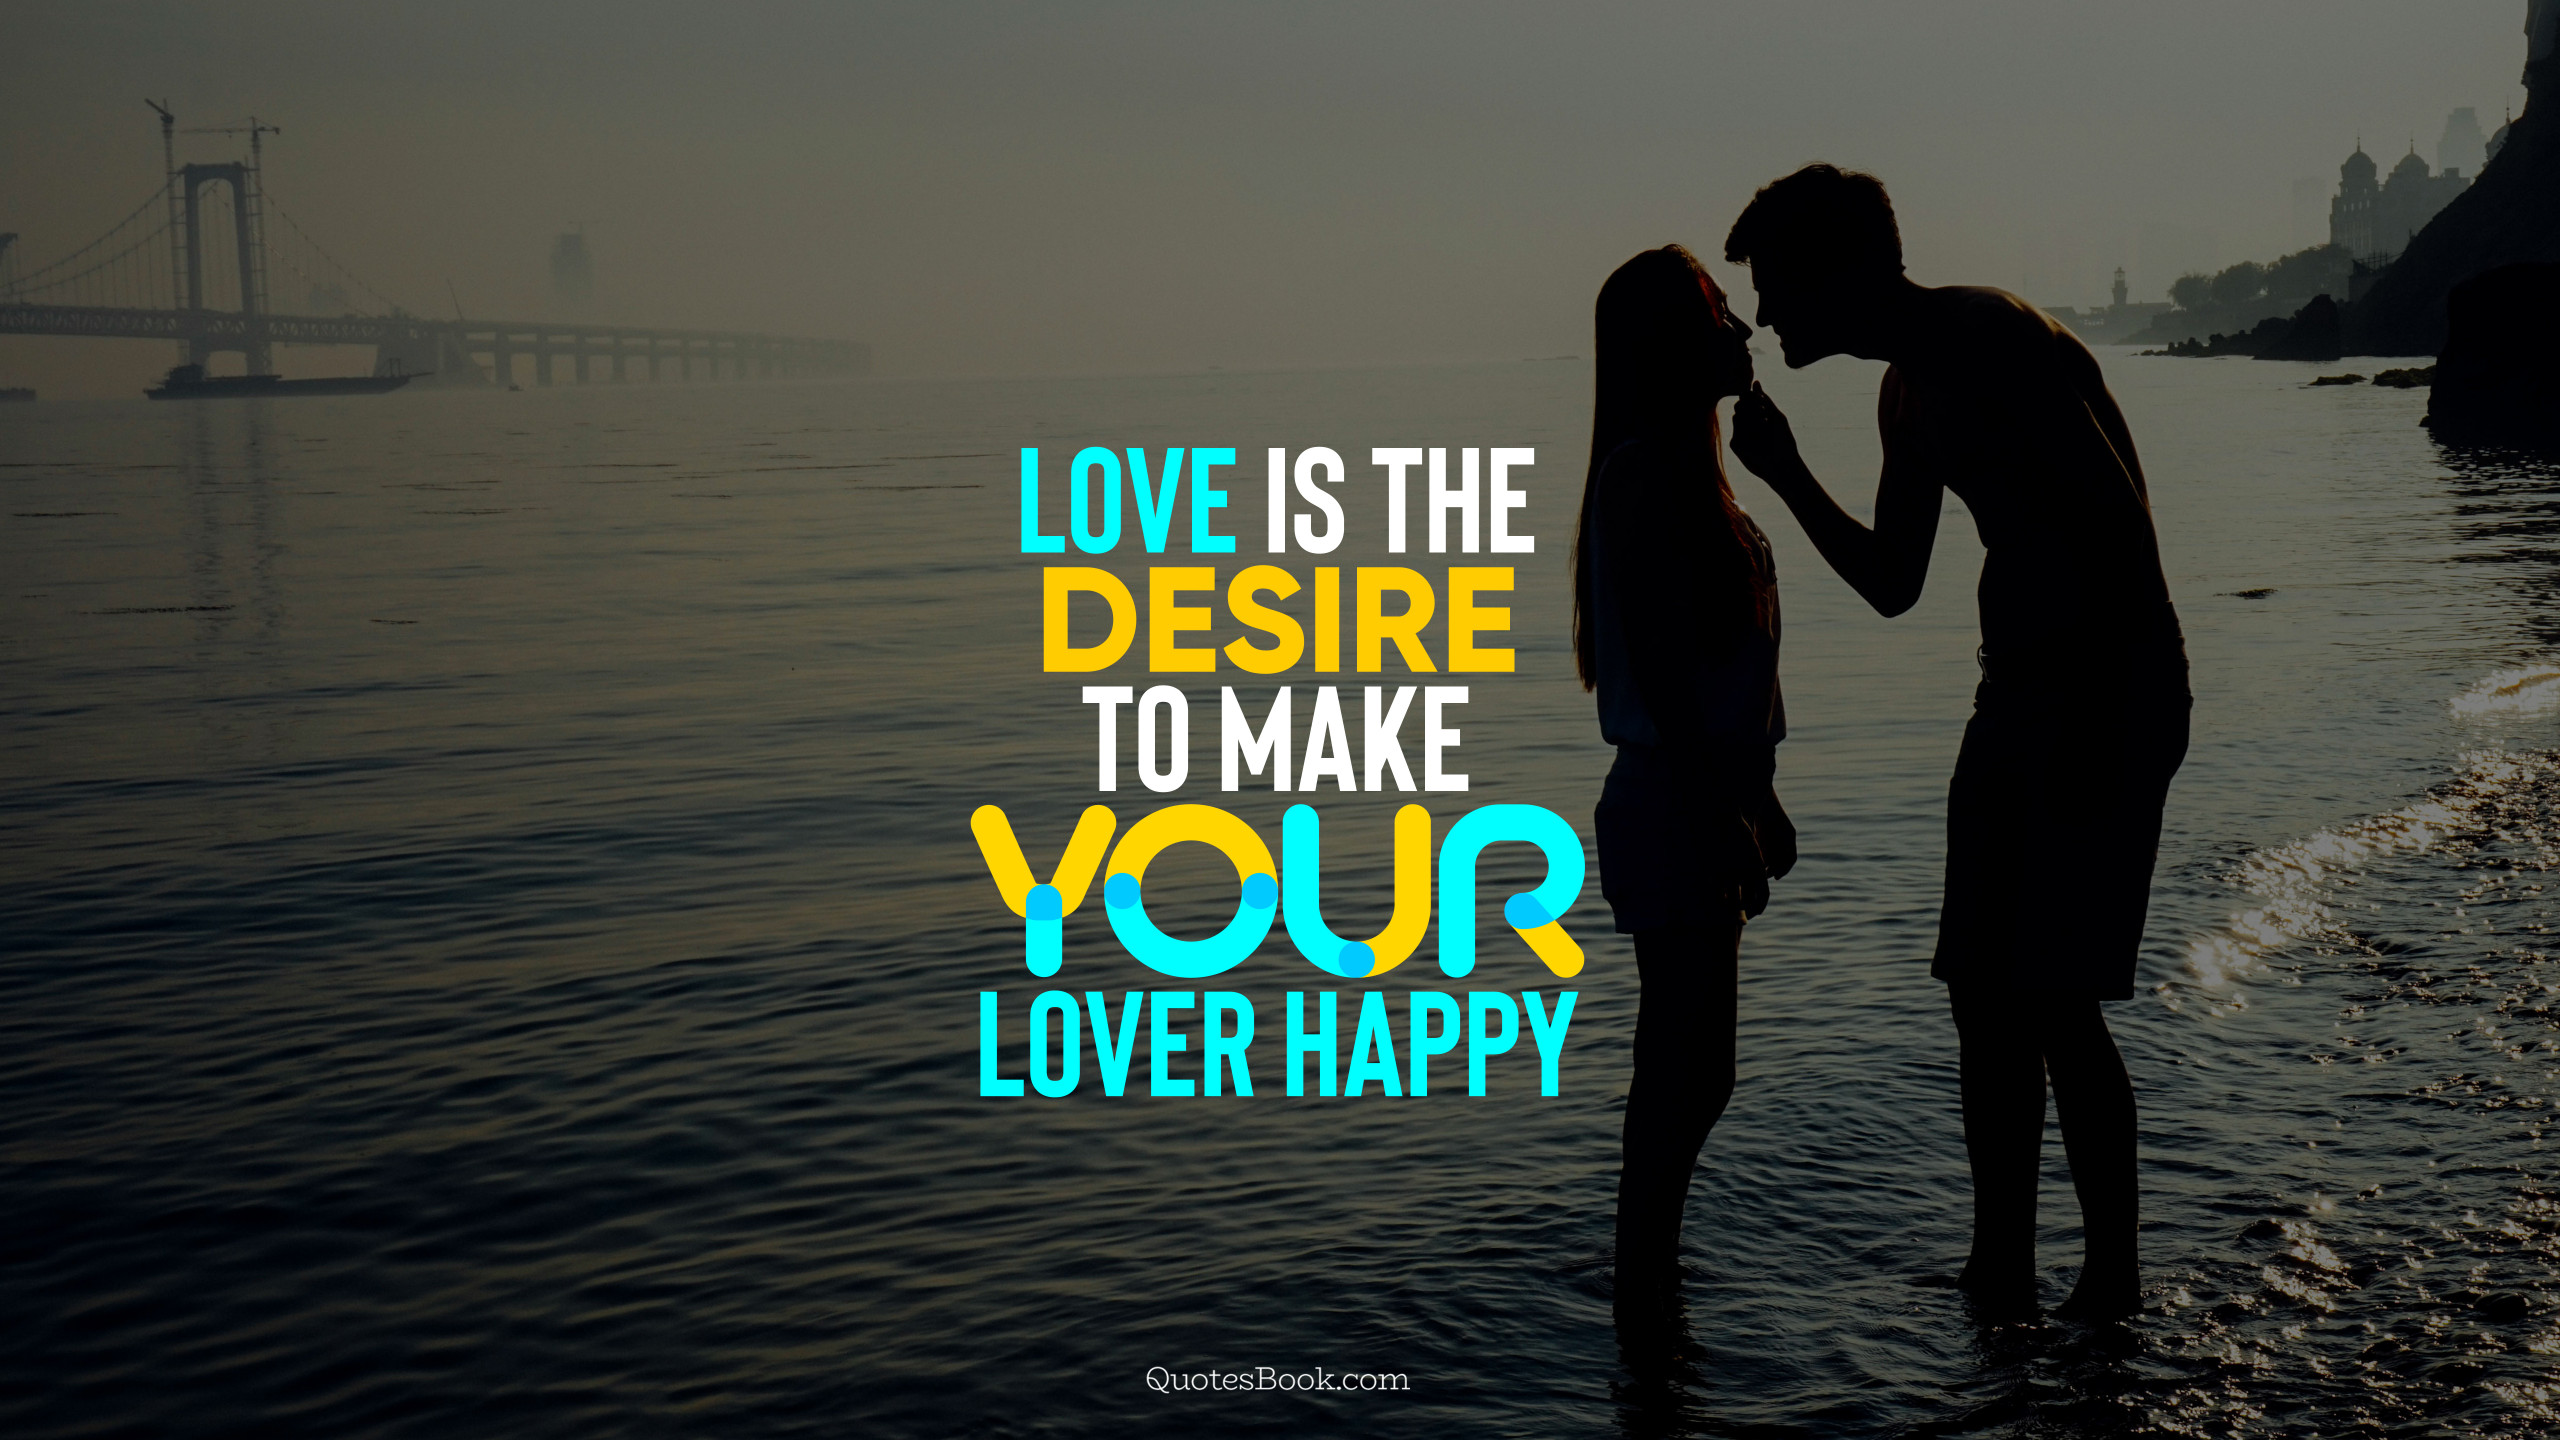 Love is the desire to make your lover happy. - Quote by QuotesBook ...